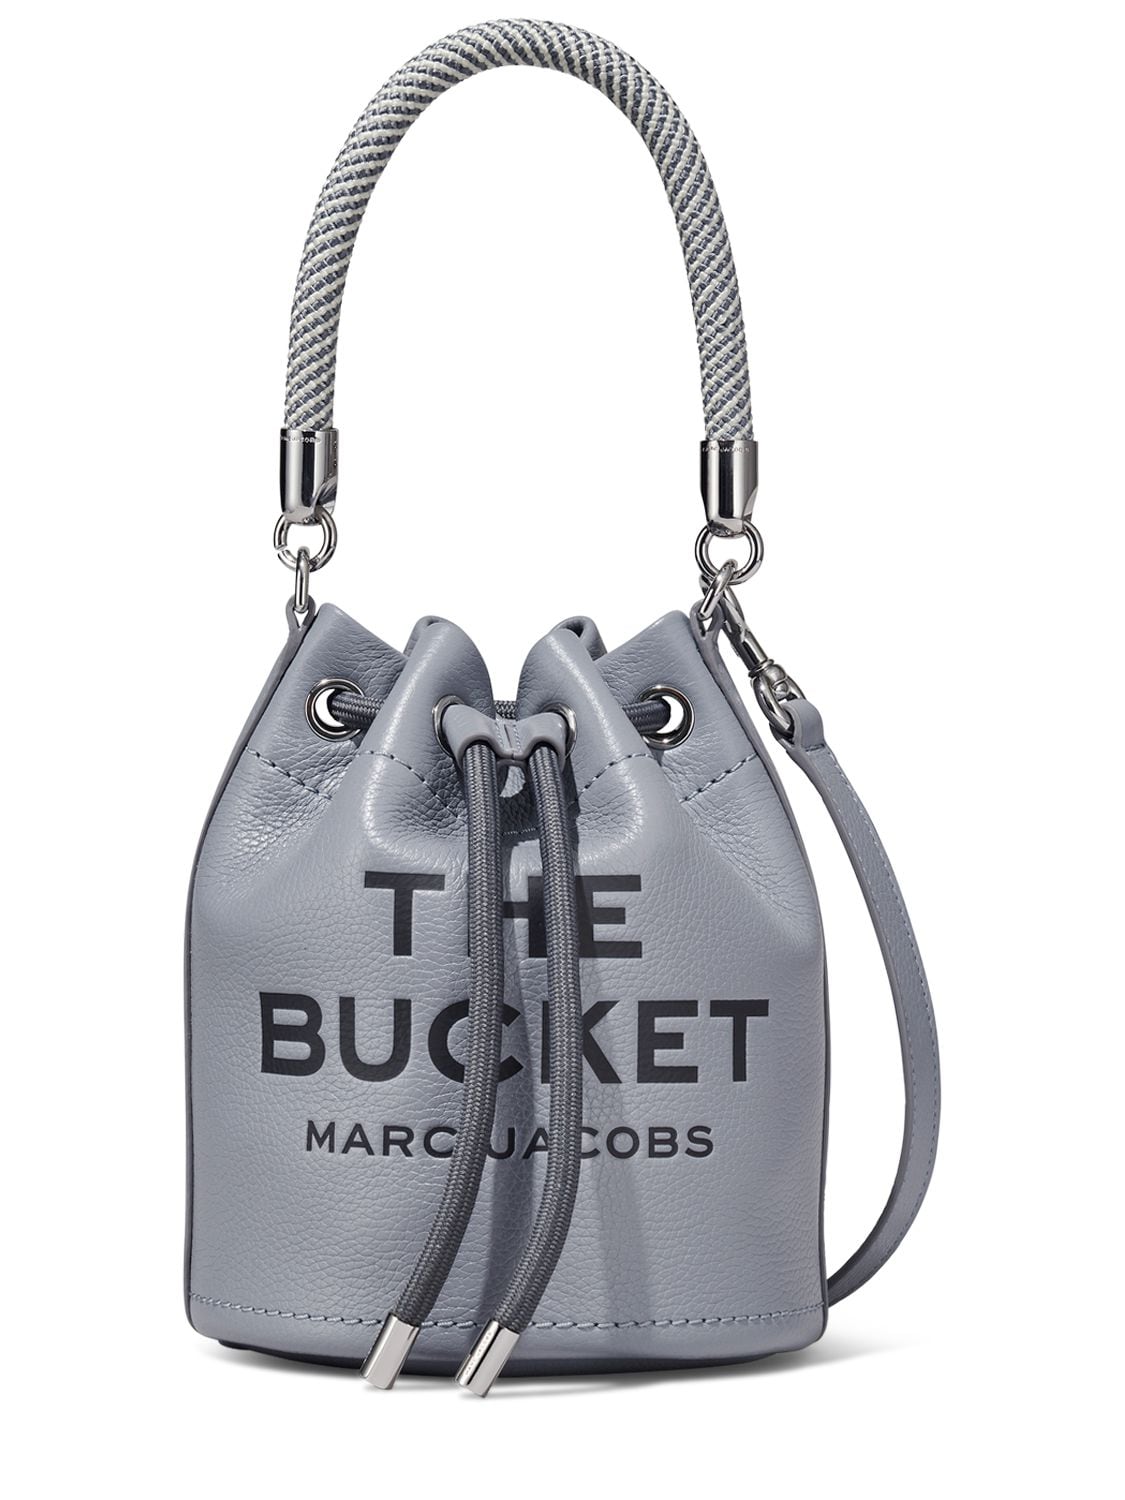 Image of The Bucket Leather Bag